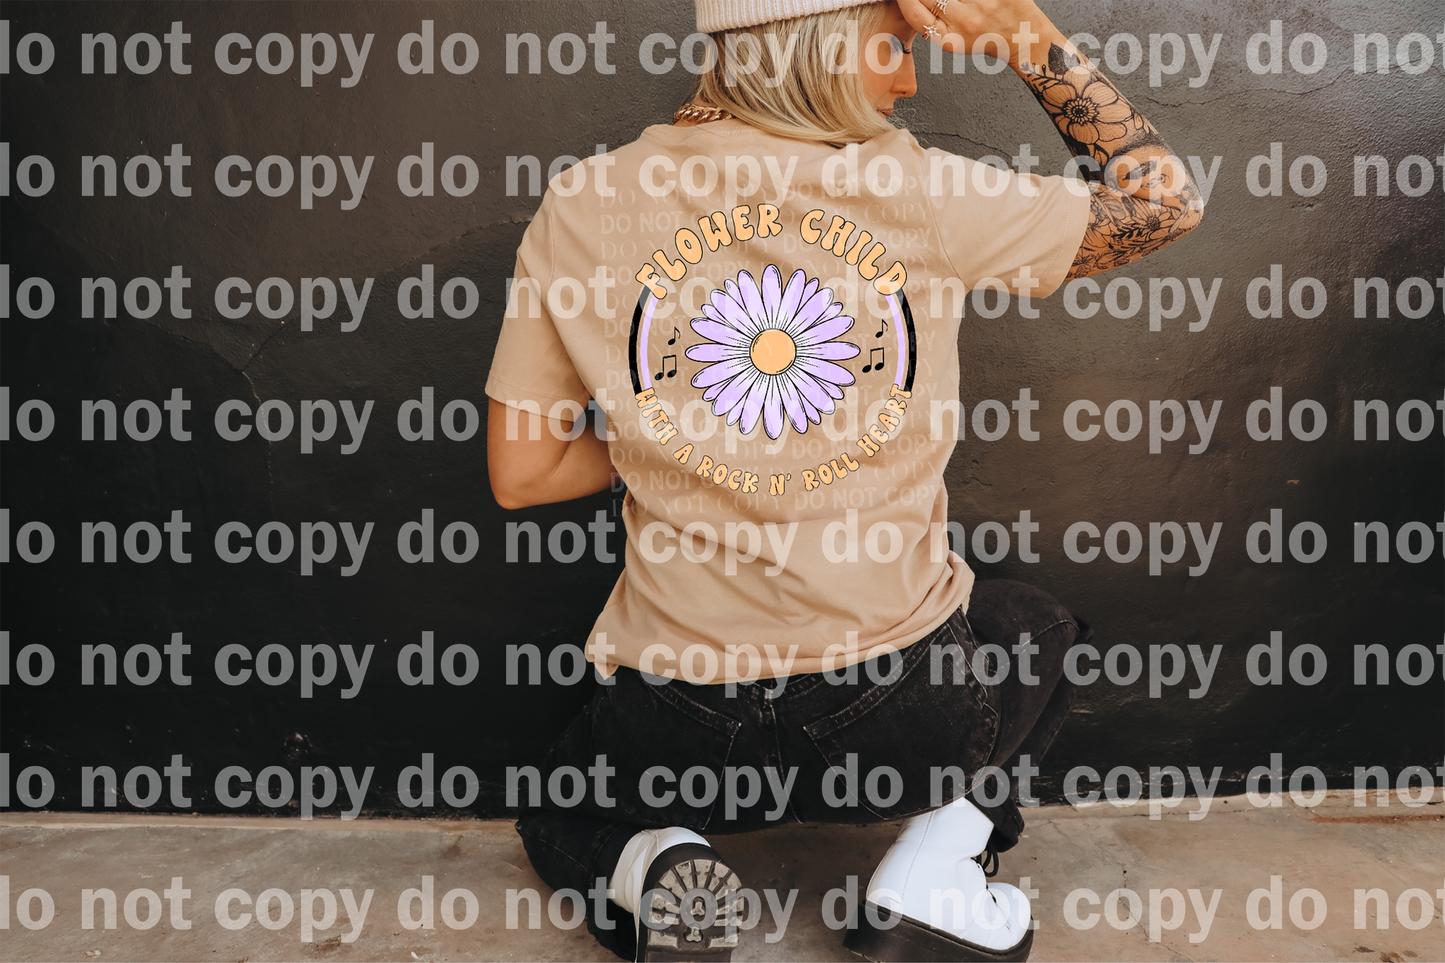 Flower Child With A Rock N Roll Heart Full Color/One Color Dream Print or Sublimation Print